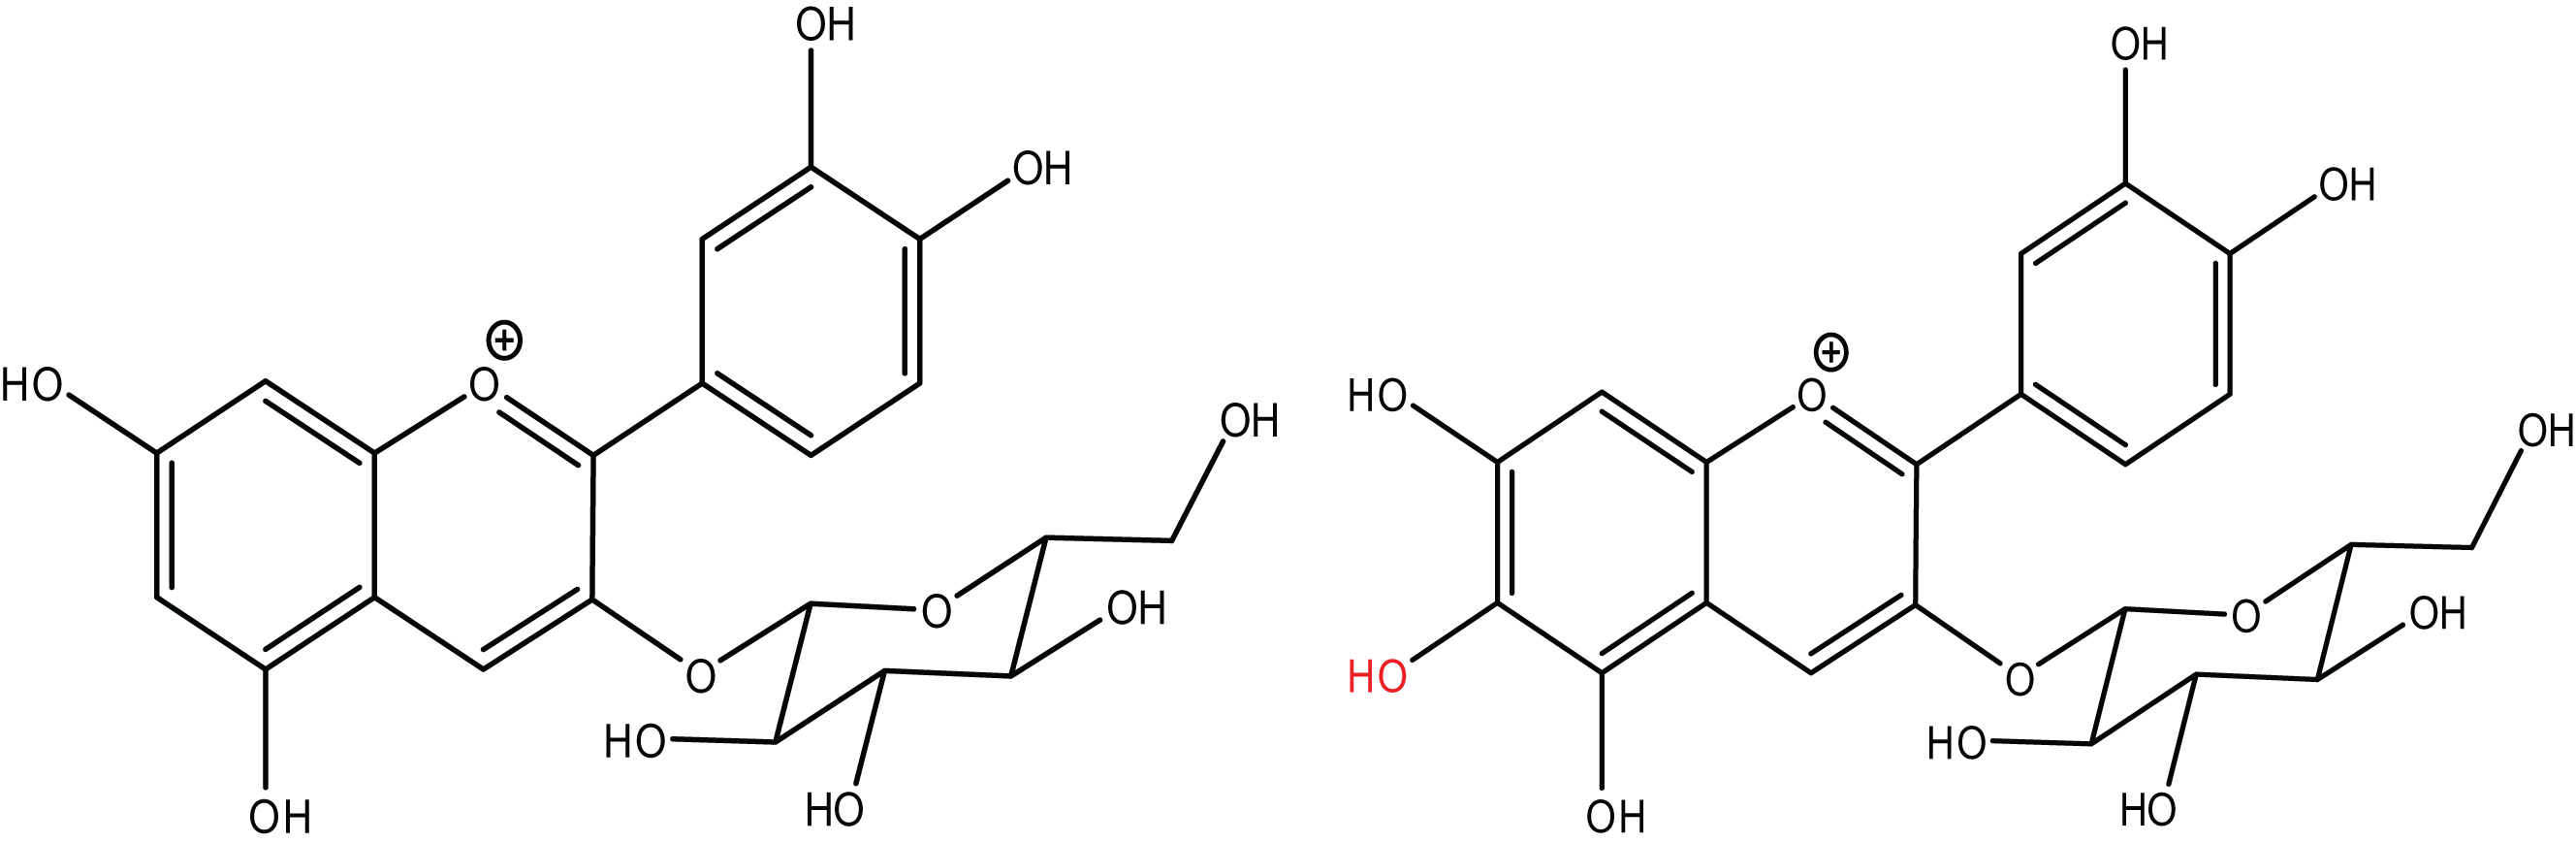 Cyanidin-3-O-β-glucoside and proposed structure of Compound 1.